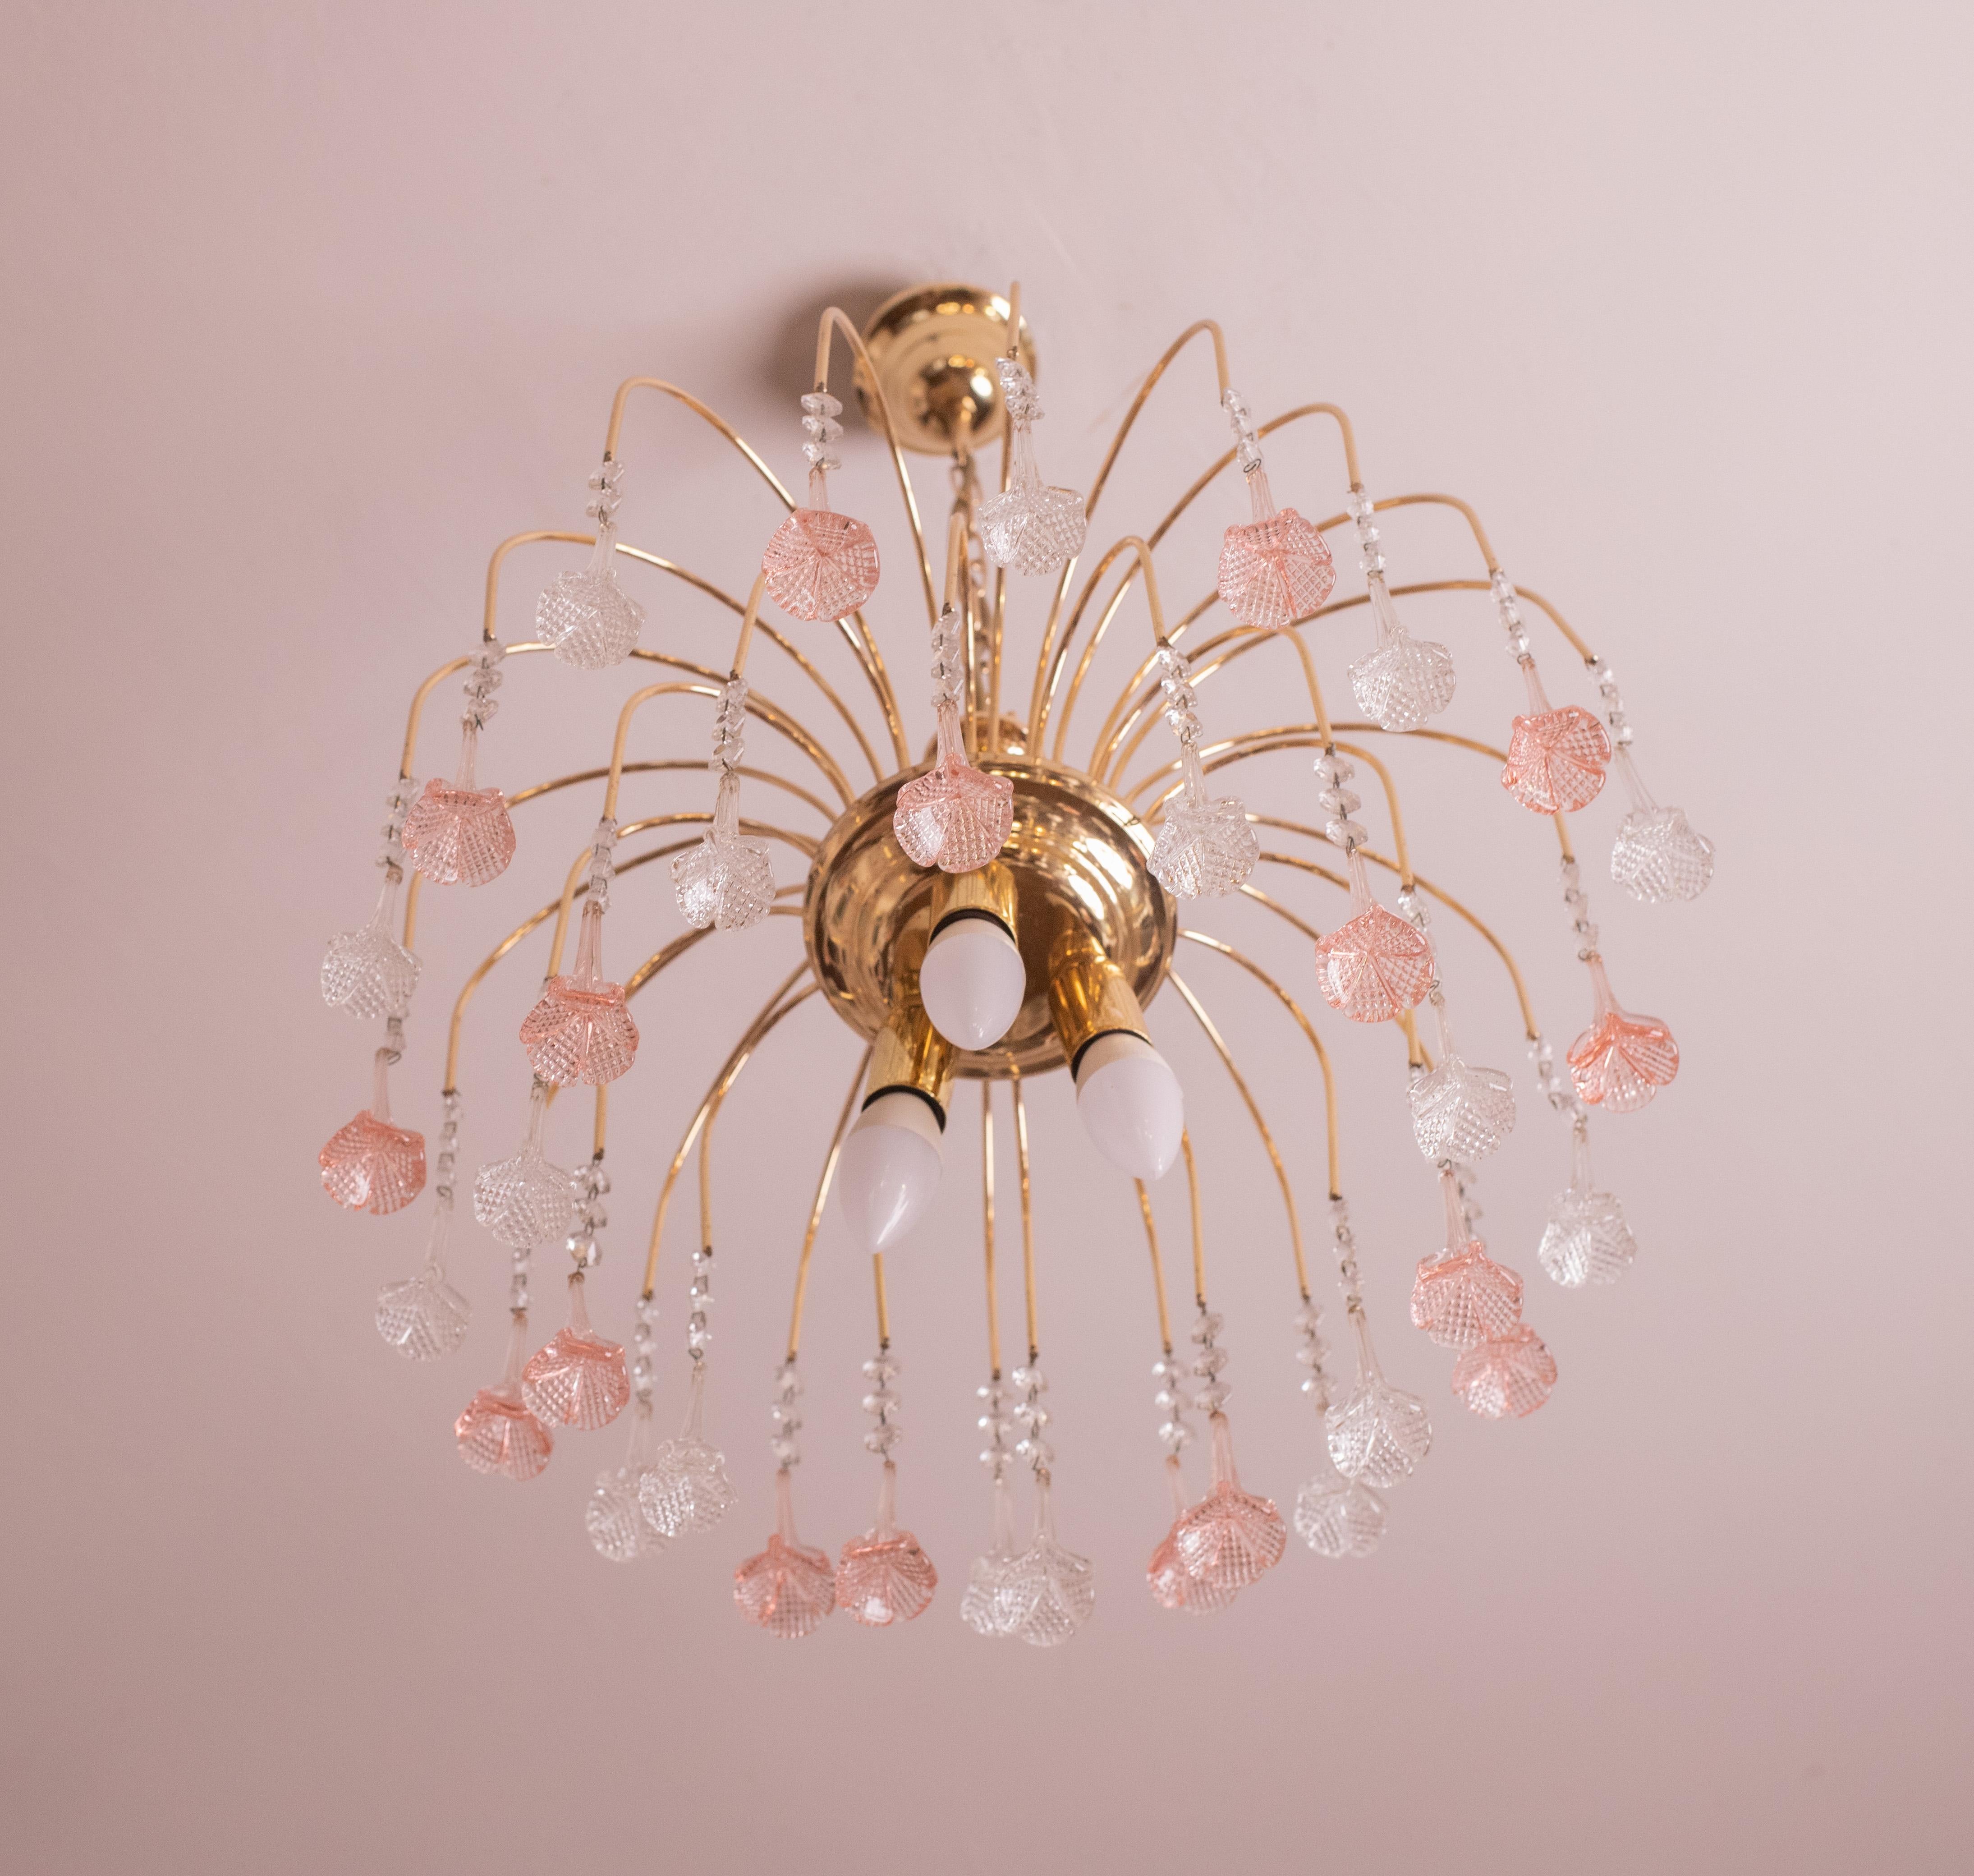 Brigitte Bardot, Pink and Trasparent Murano Flowers Chandelier, 1970s For Sale 4